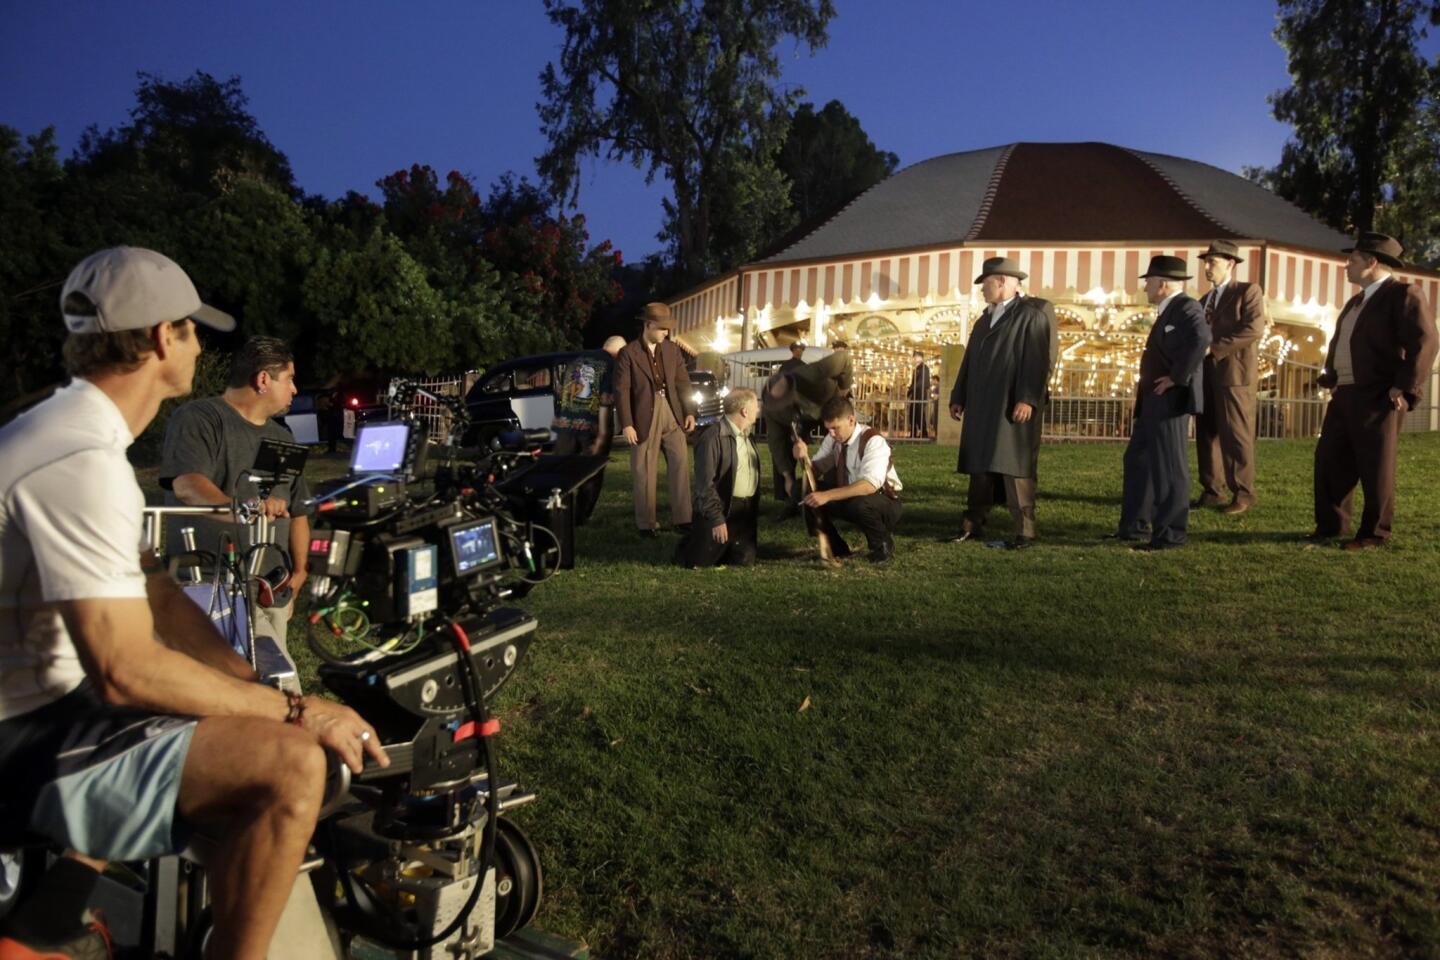 The cast and crew of the 1940s-set crime drama "Mob City" on location in Griffith Park in Los Angeles.